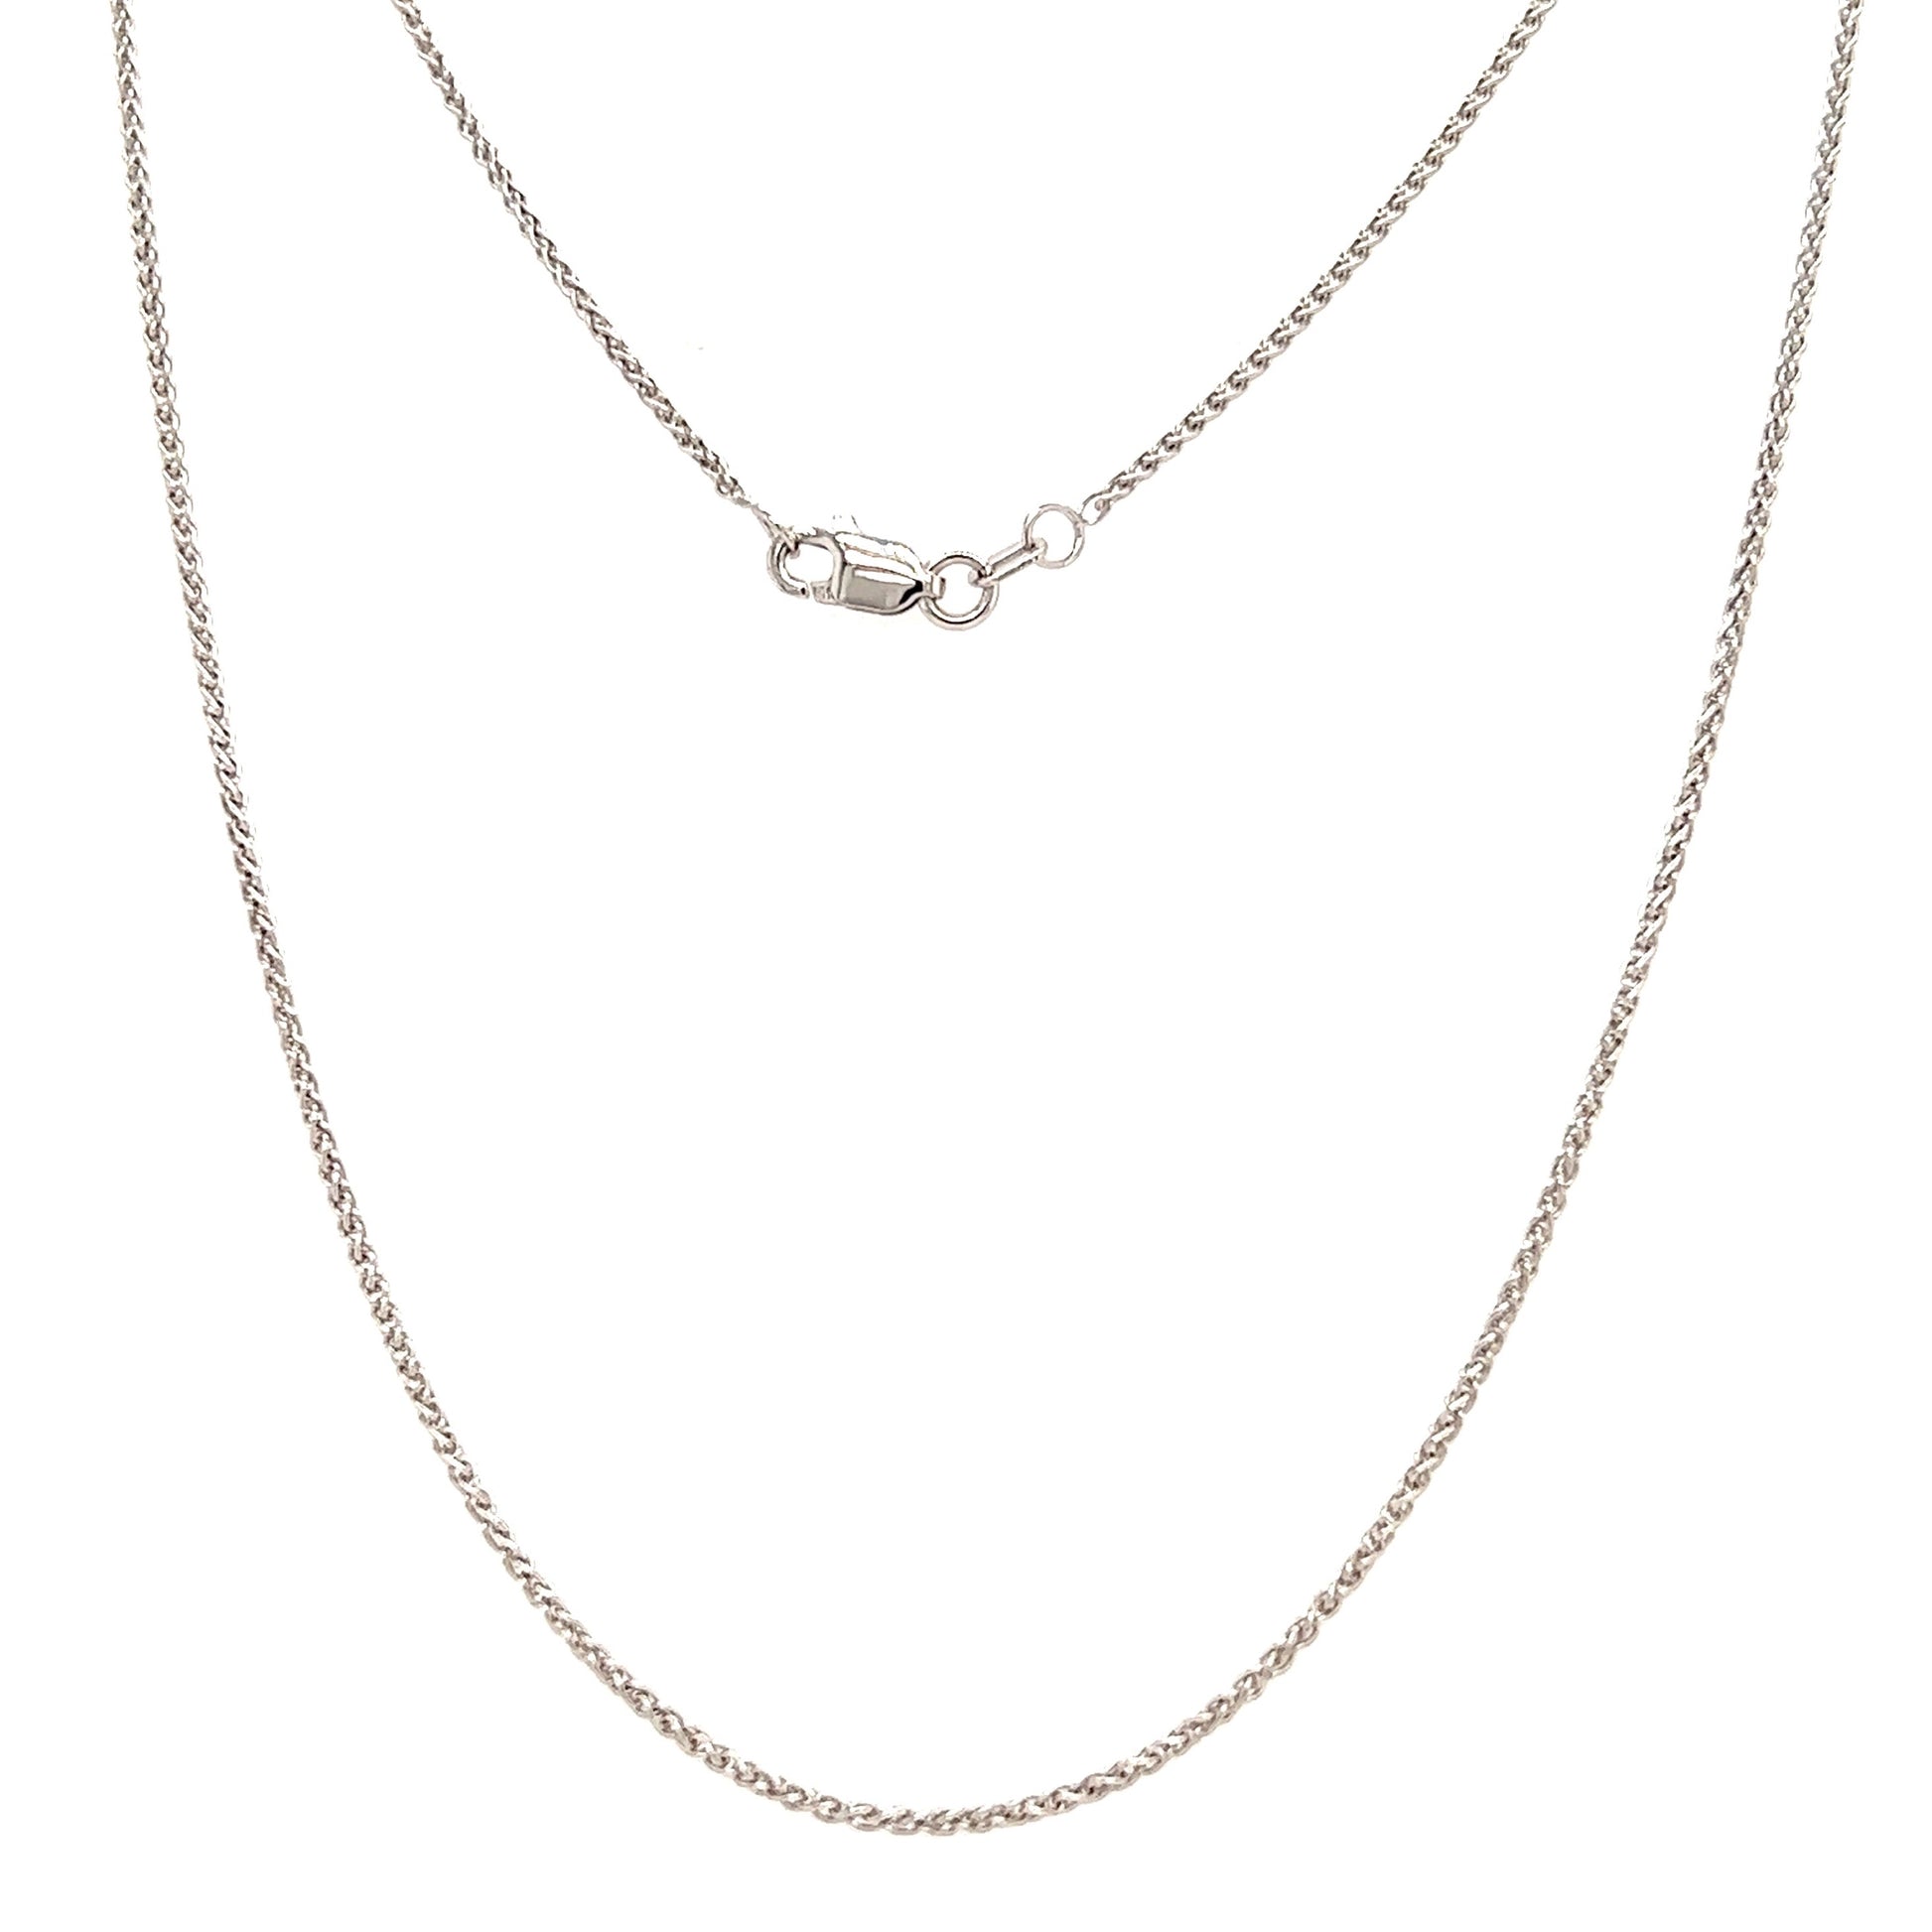 Wheat Chain 1.25mm with 16in Length in 14K White Gold Full Chain View